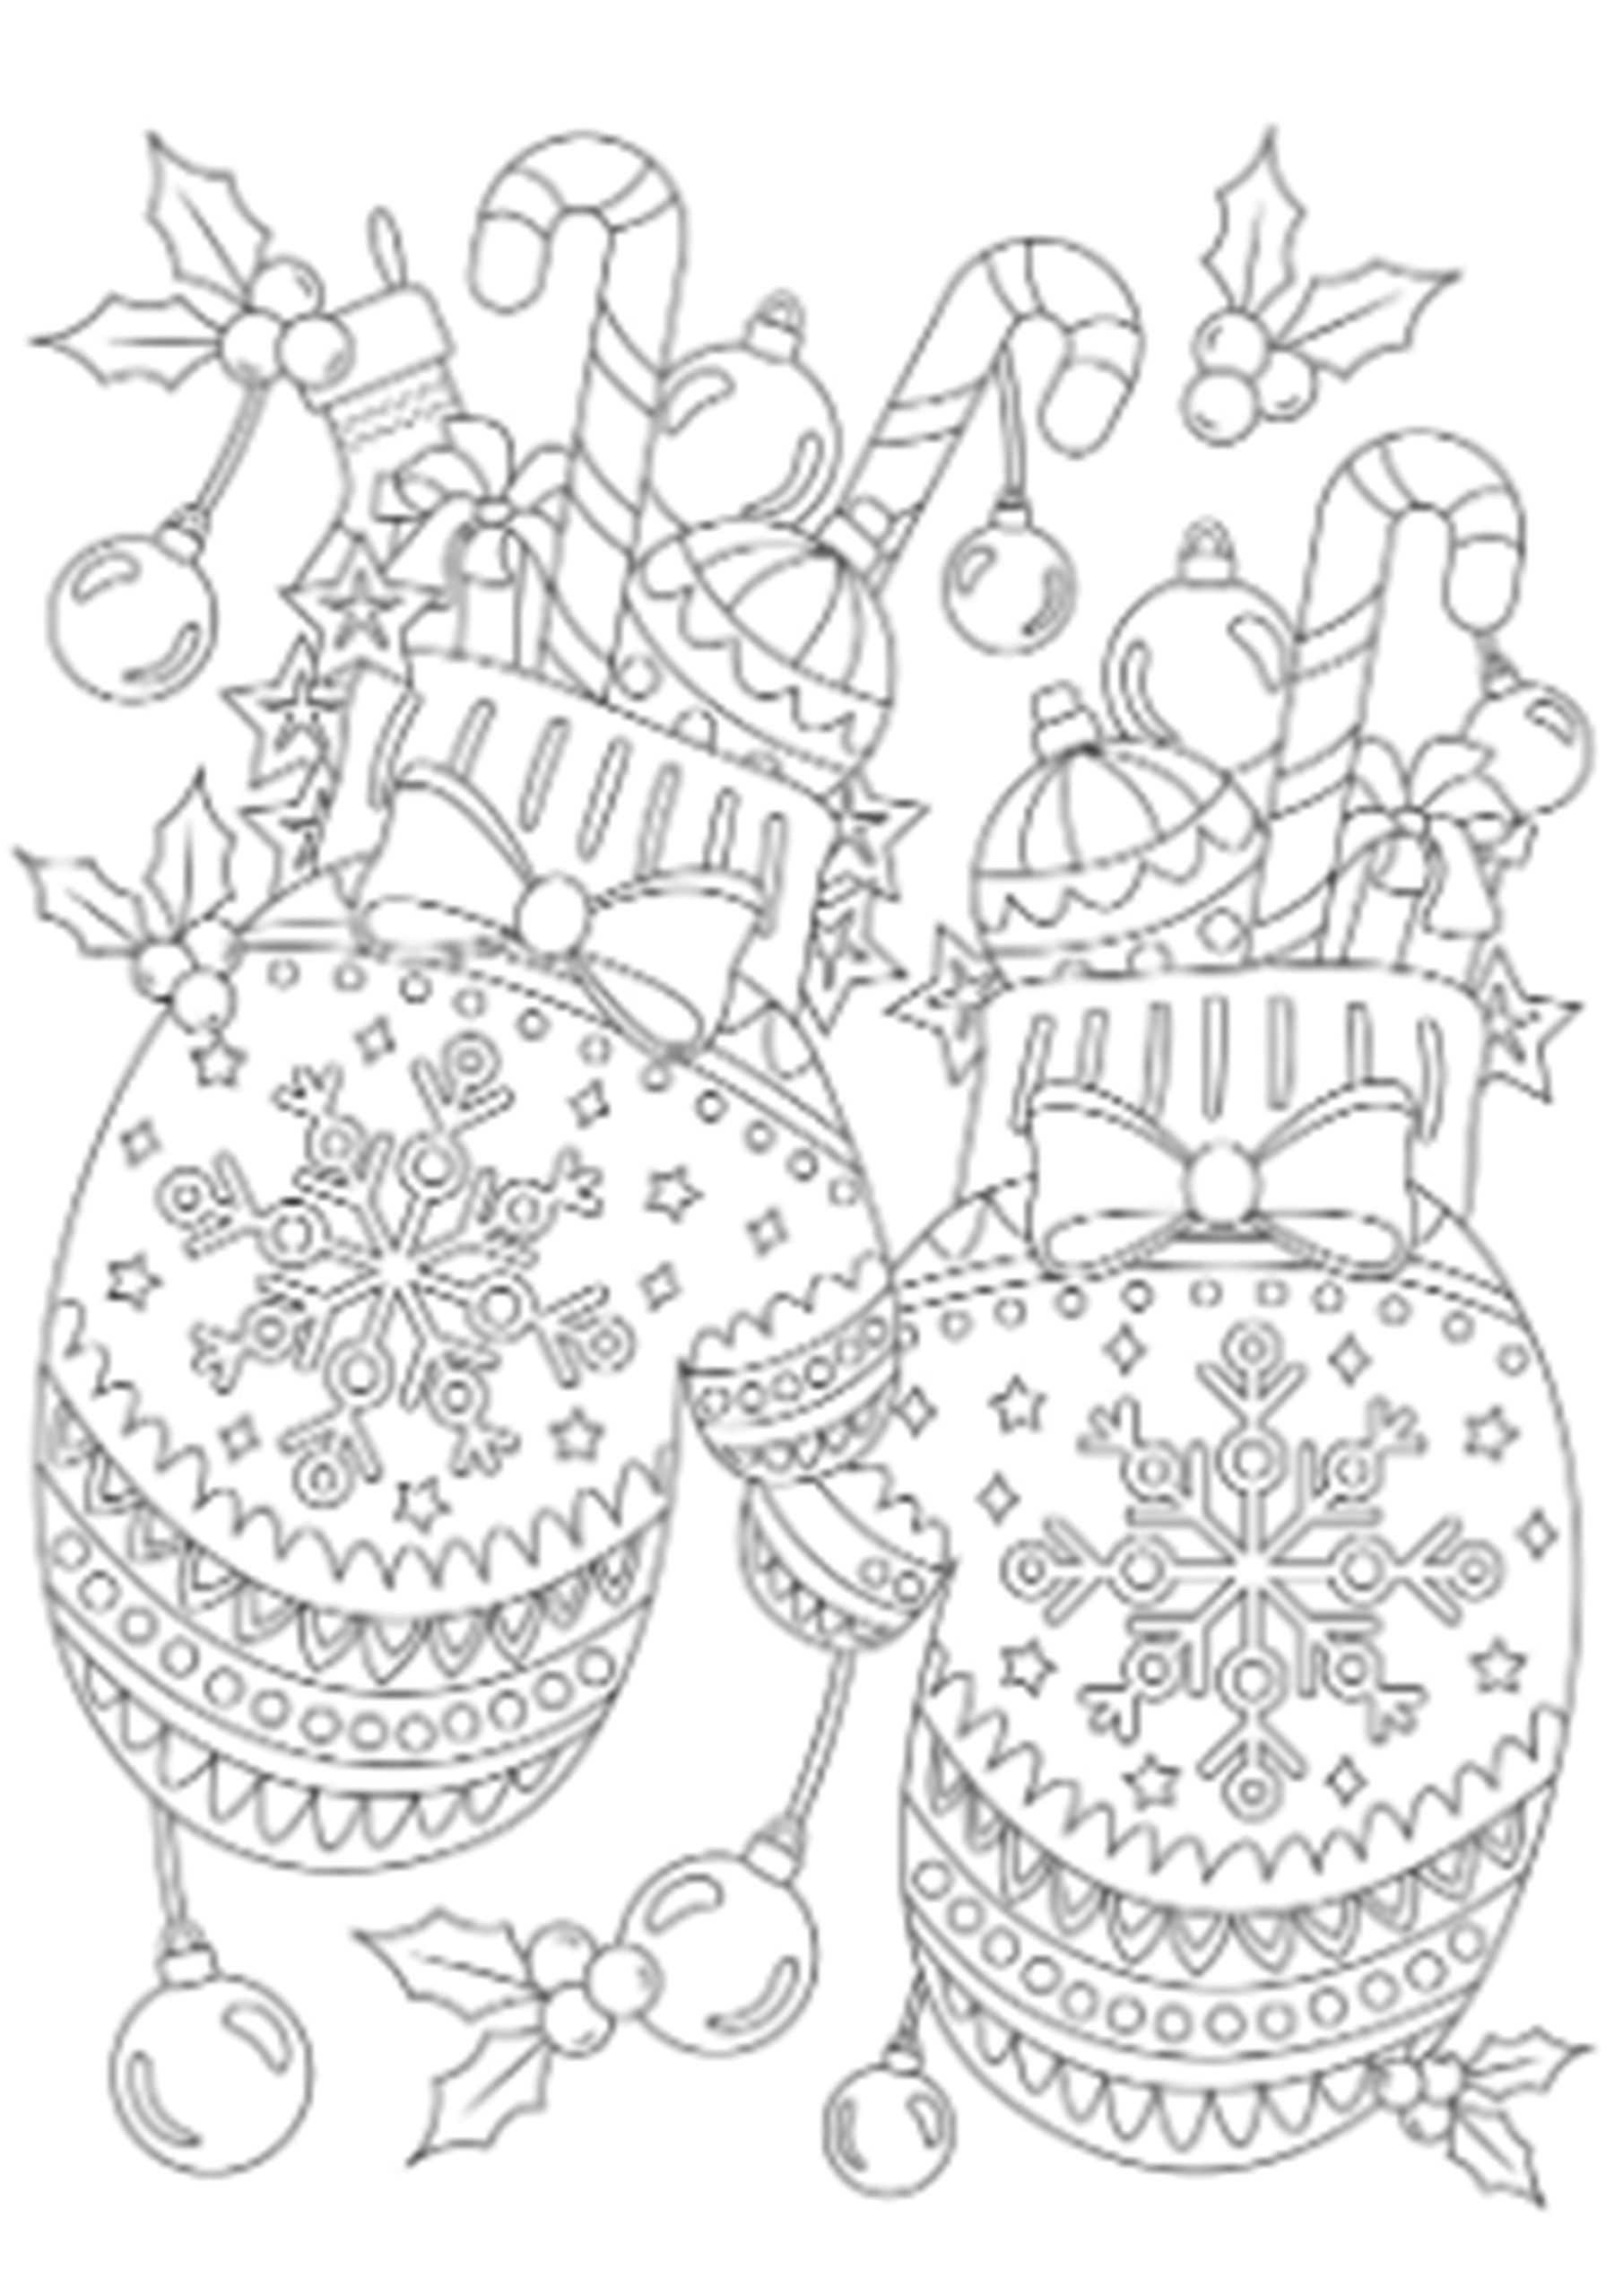 257 Adult coloring pages color by number 图片、库存照片、3D 物体和矢量图